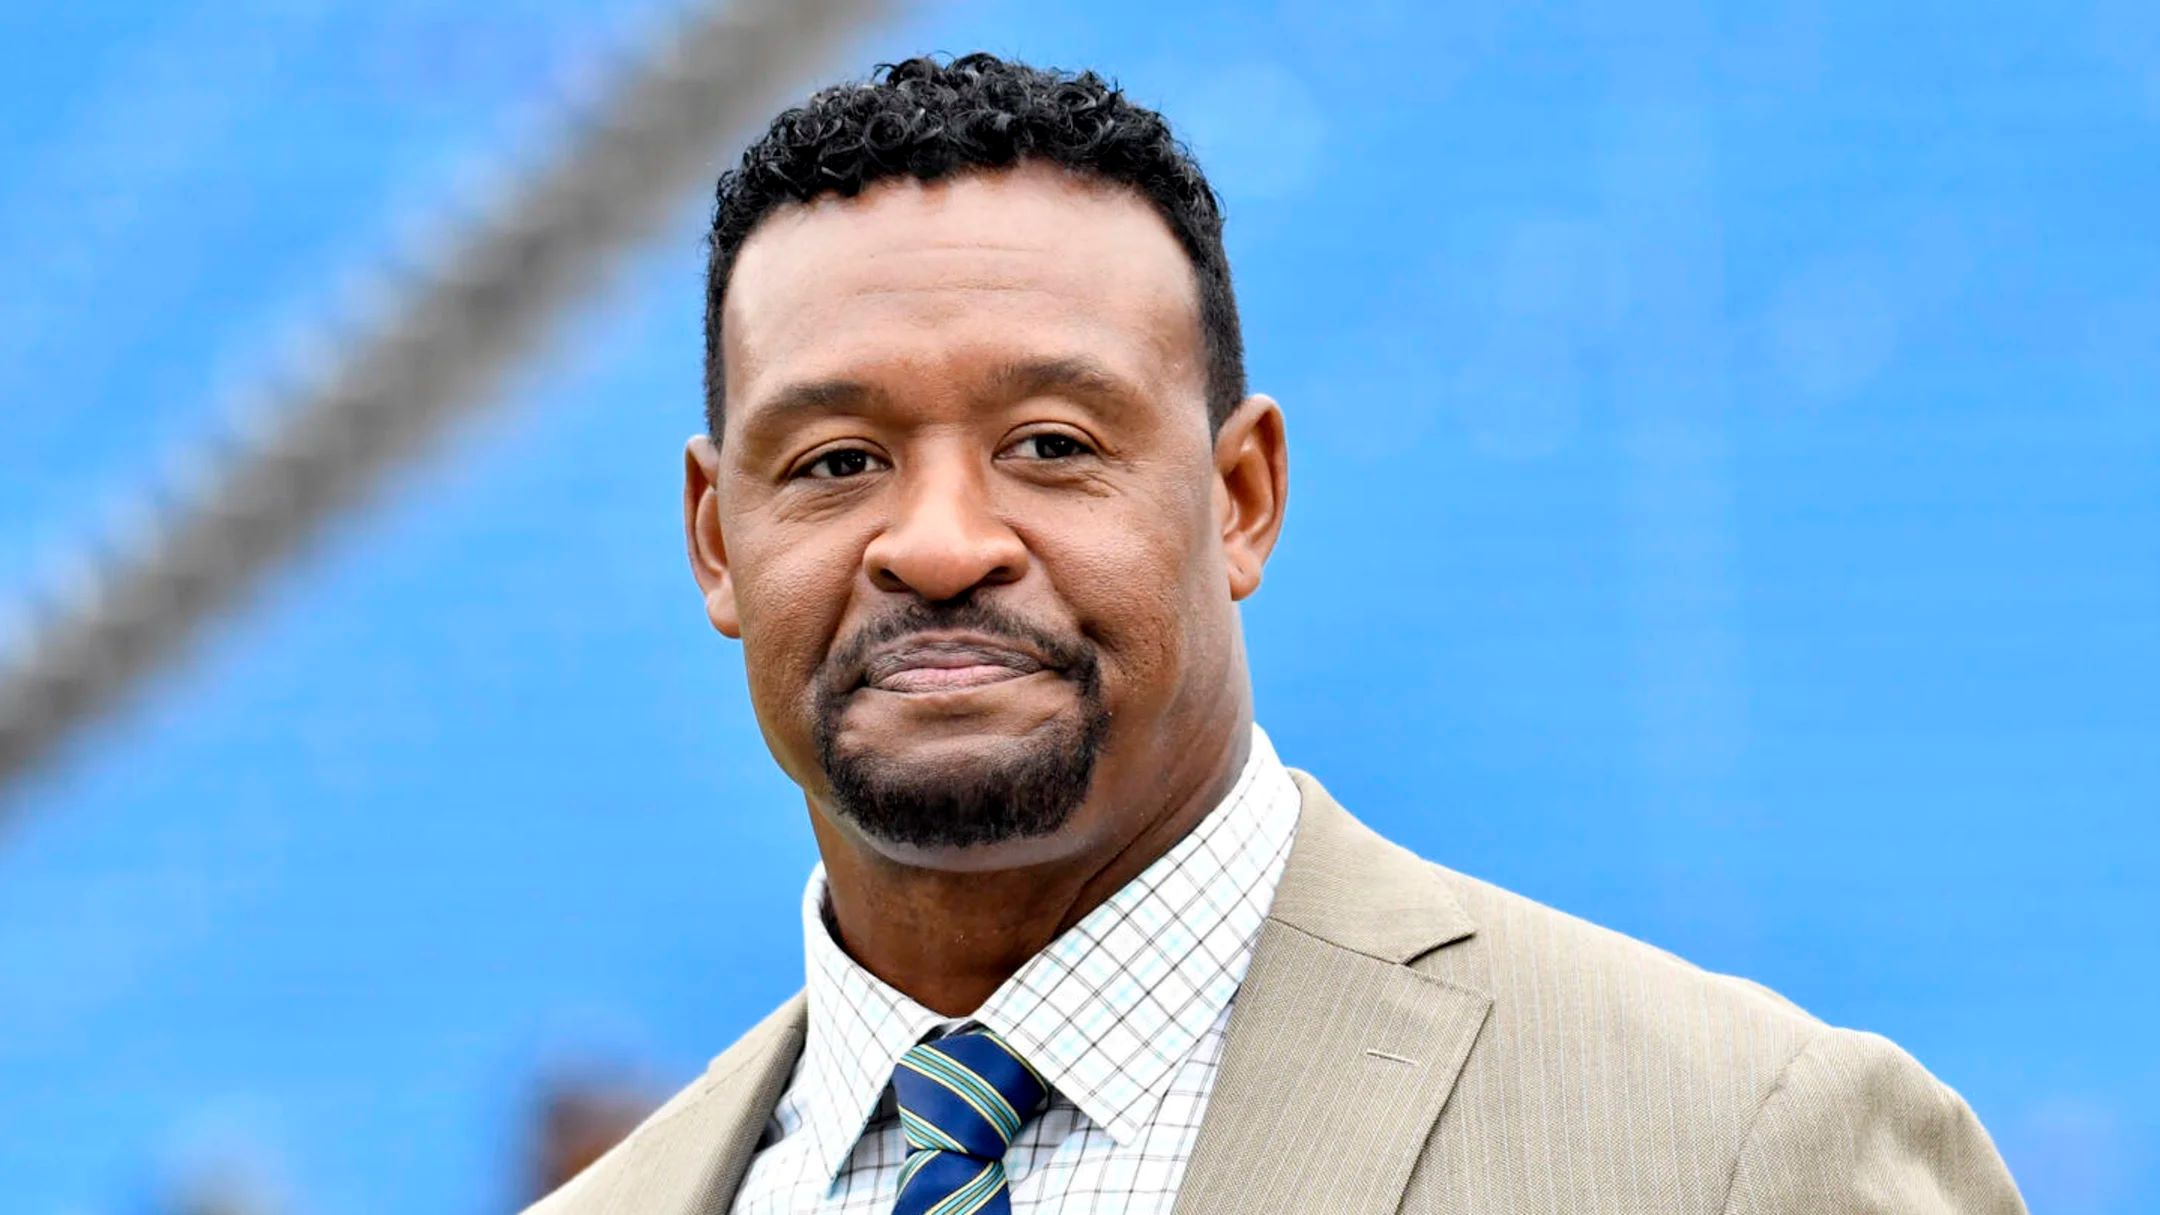 21-extraordinary-facts-about-willie-mcginest